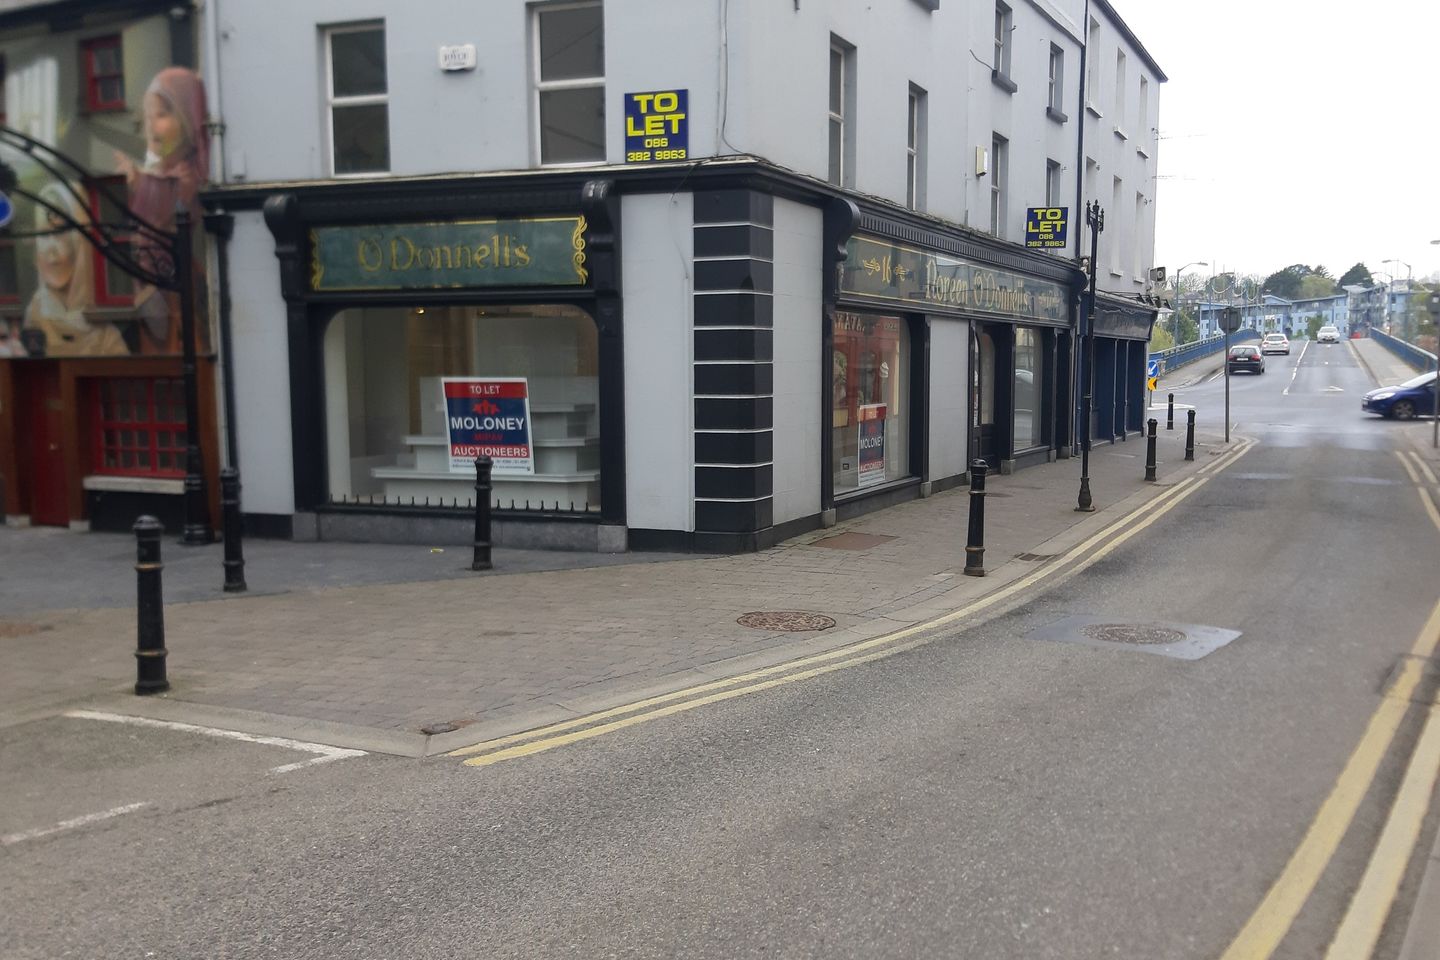 16/17 Quay Street, New Ross, Co. Wexford